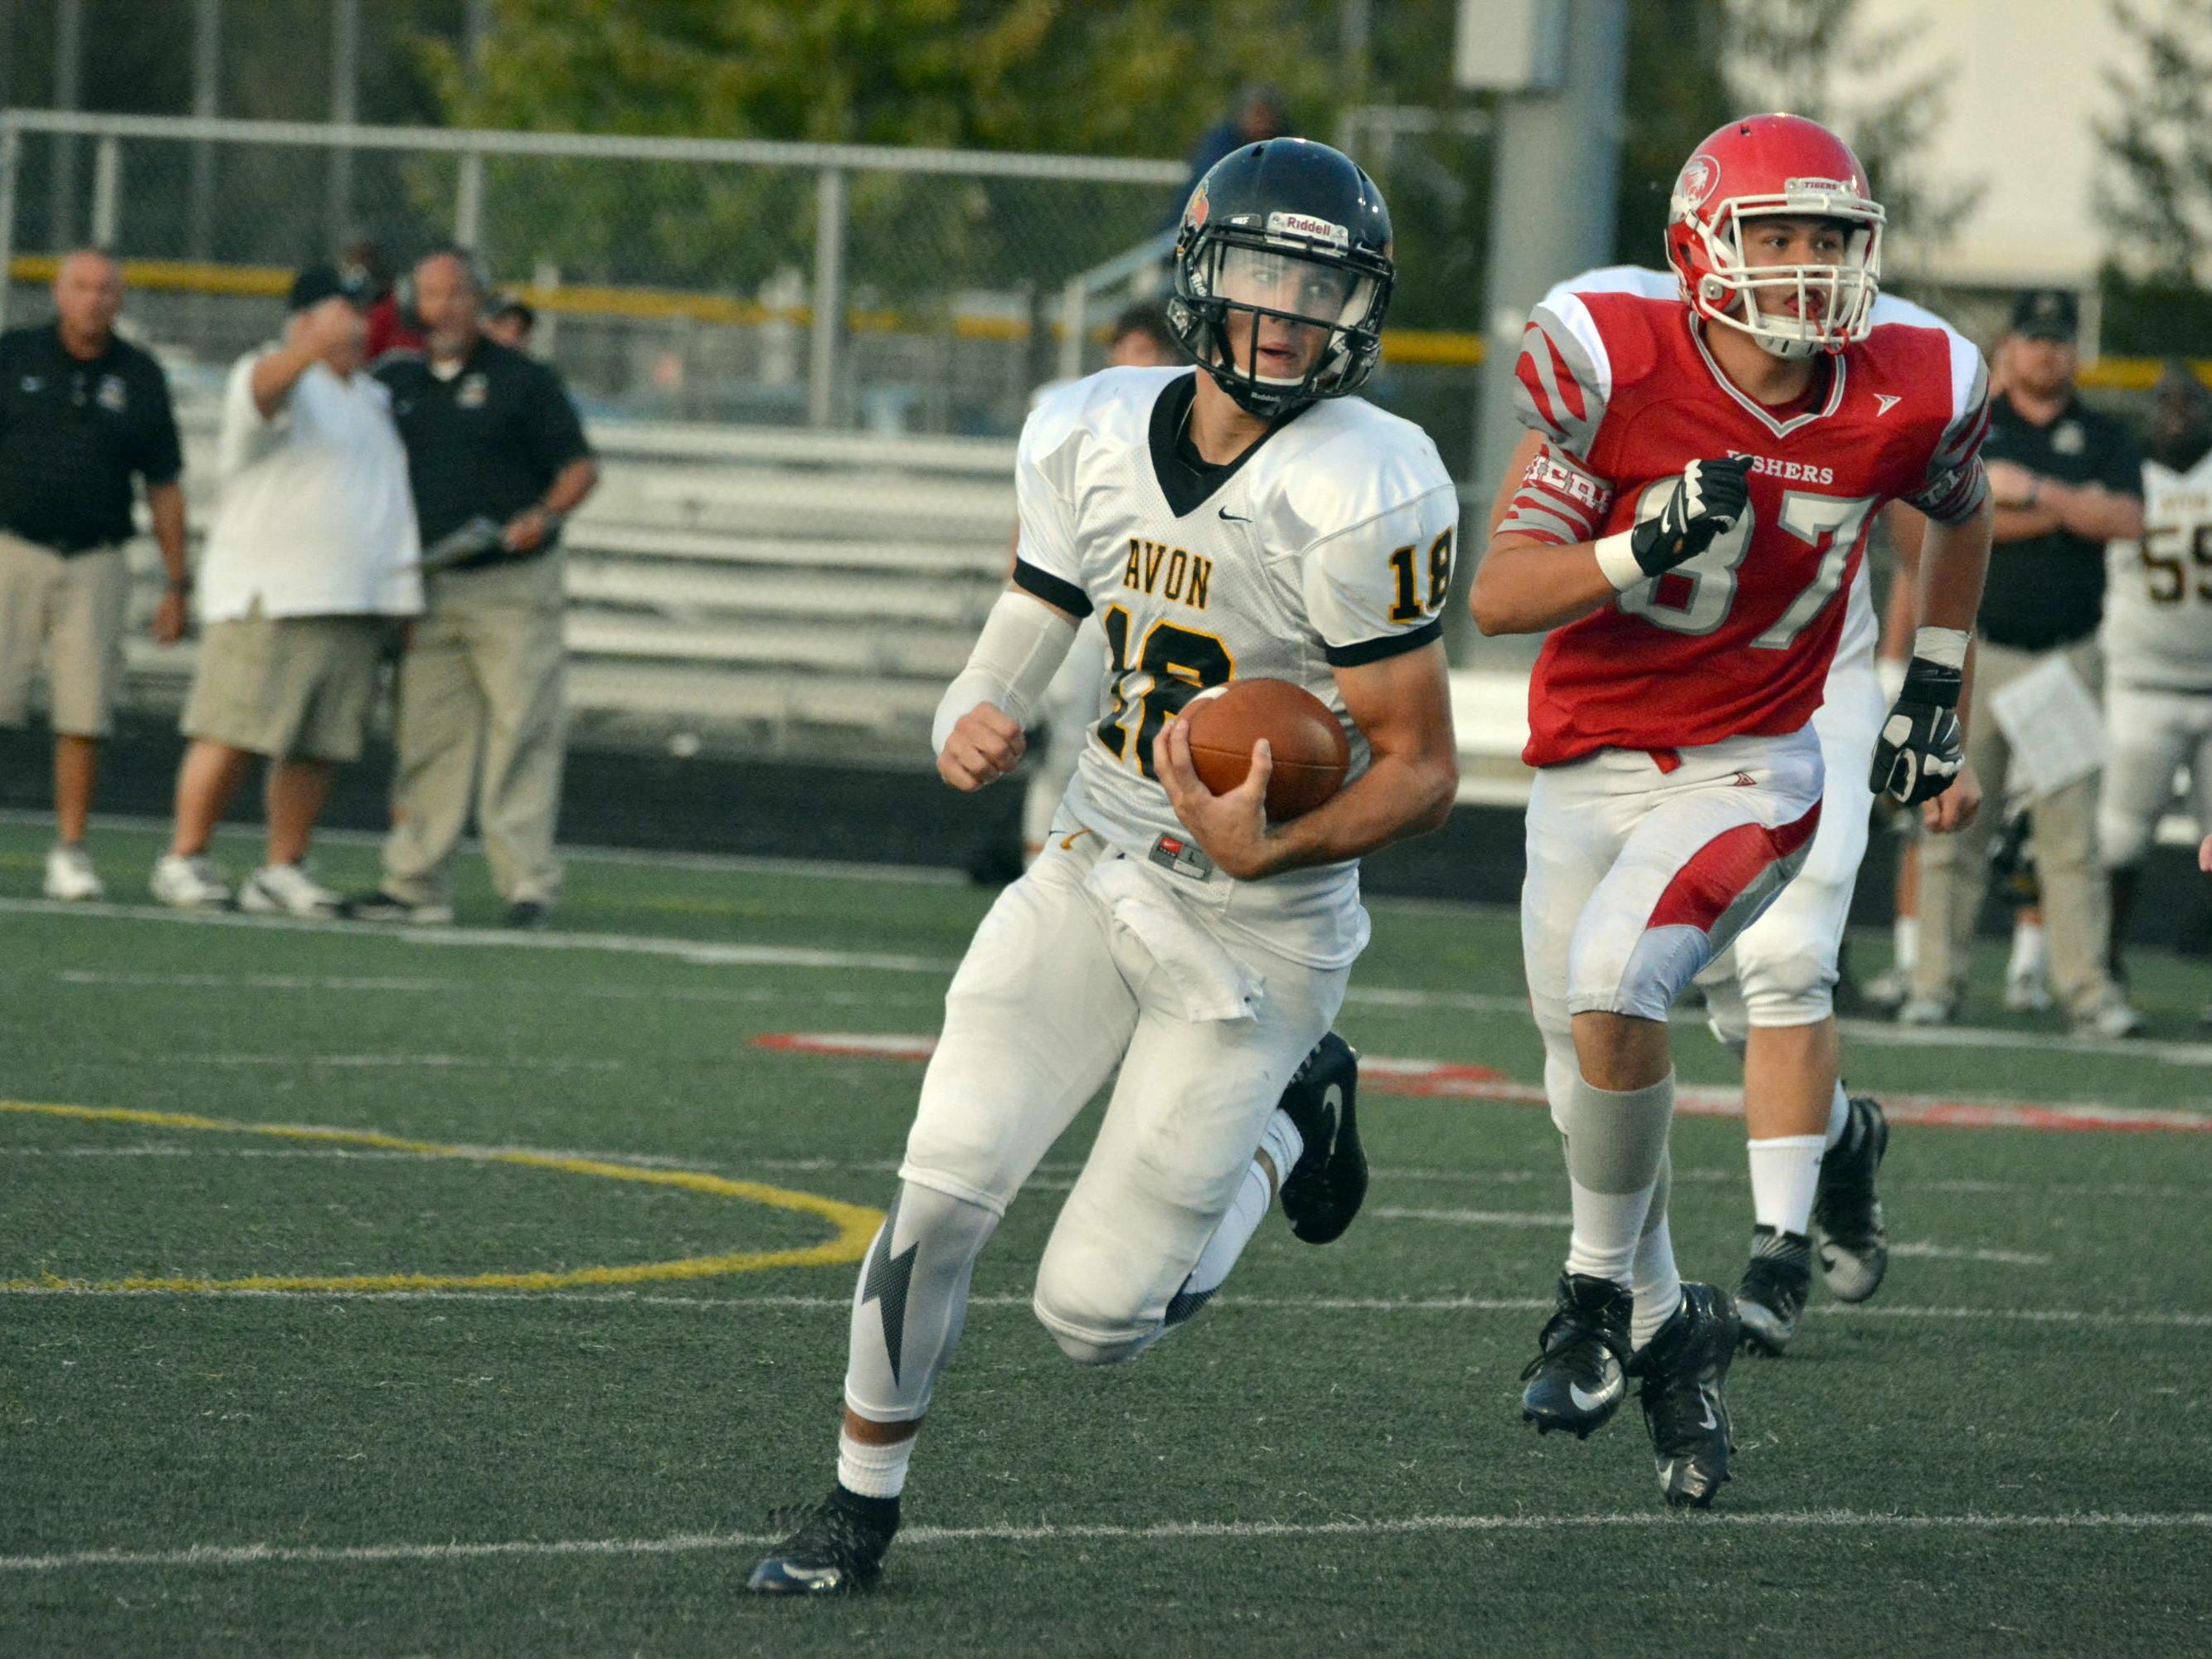 HS football Fishers falls short as Avon pulls away with balanced